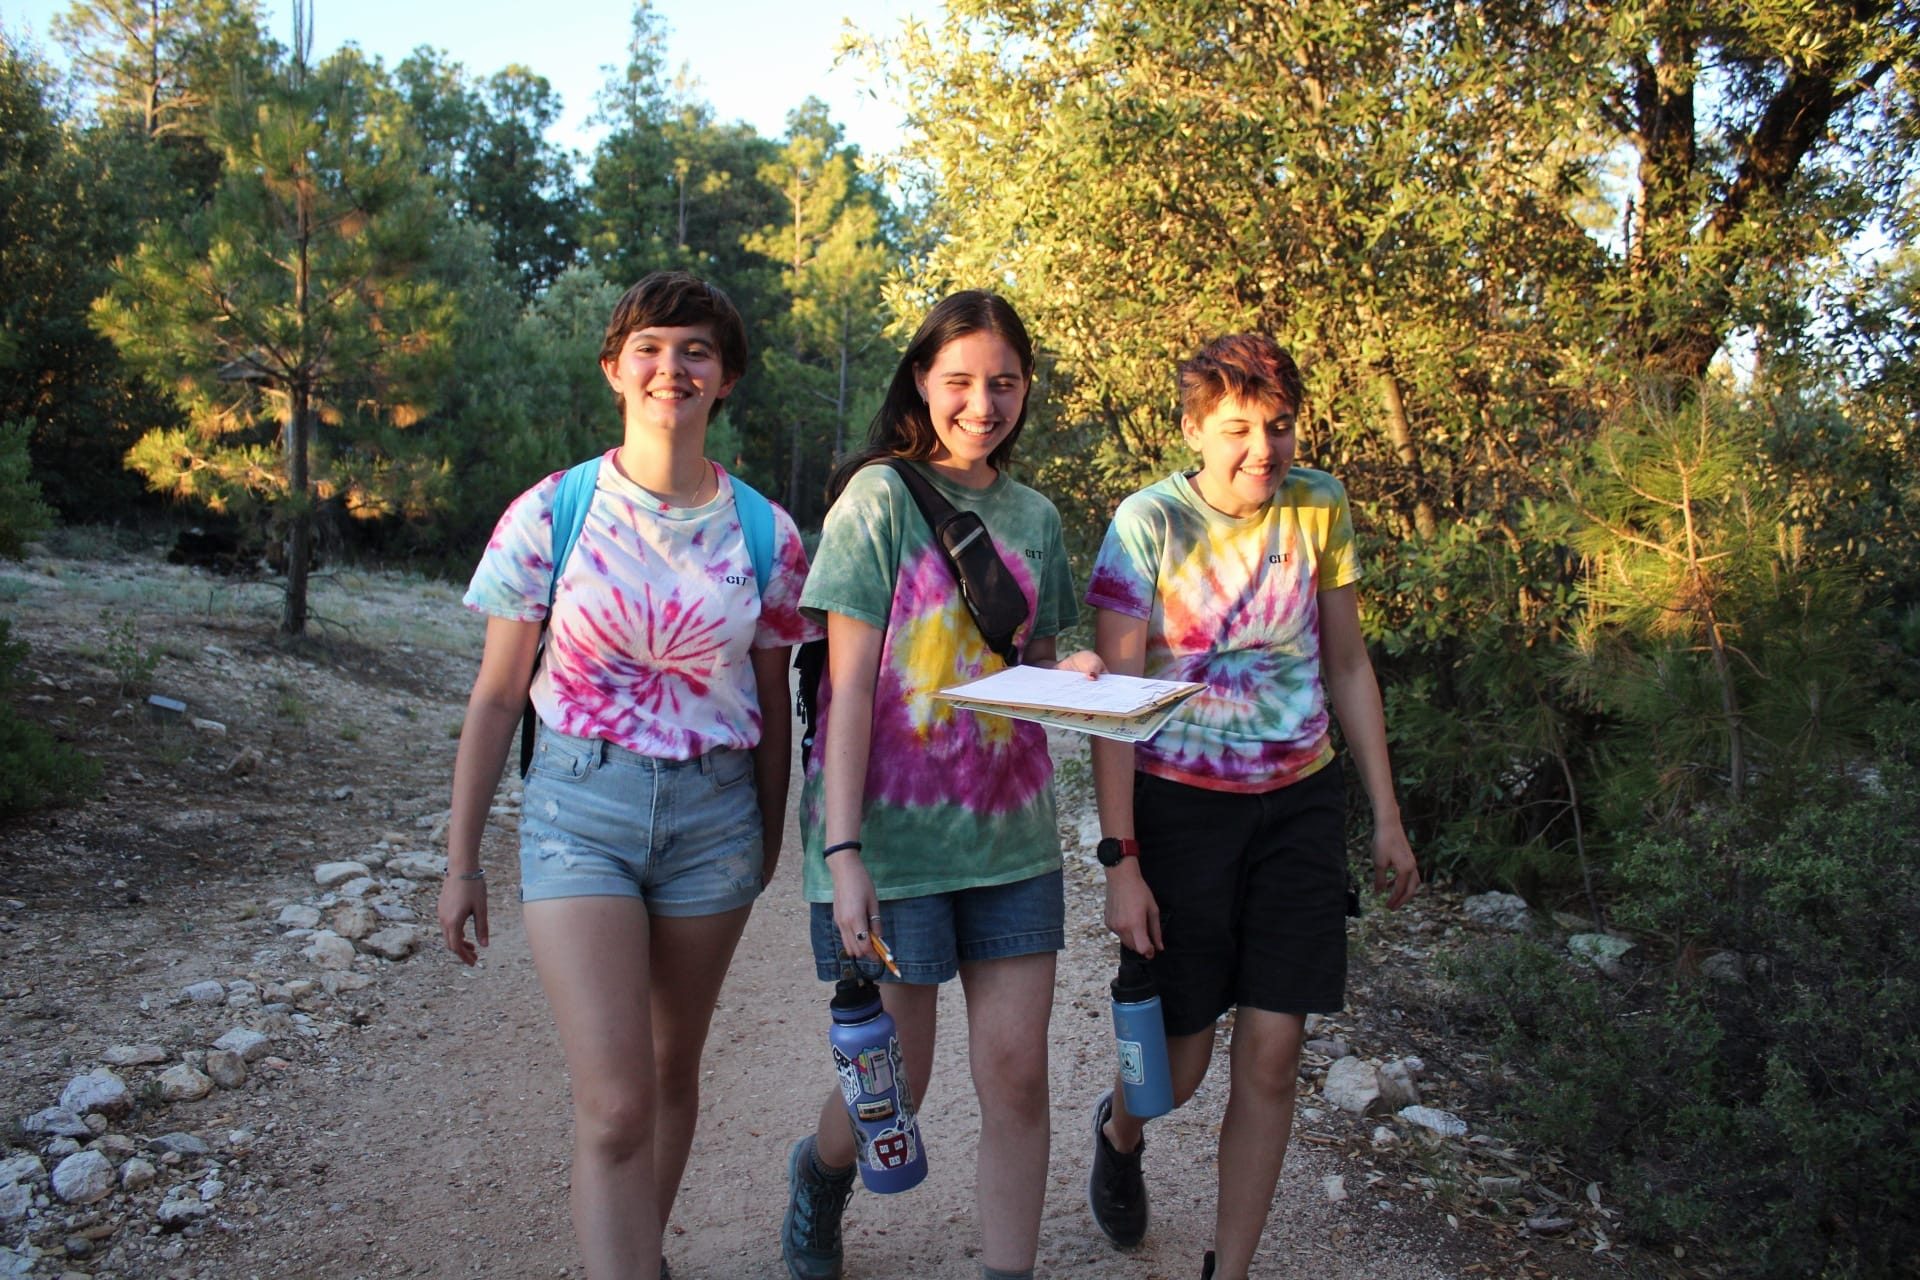 CIT girl scouts hiking and smiling